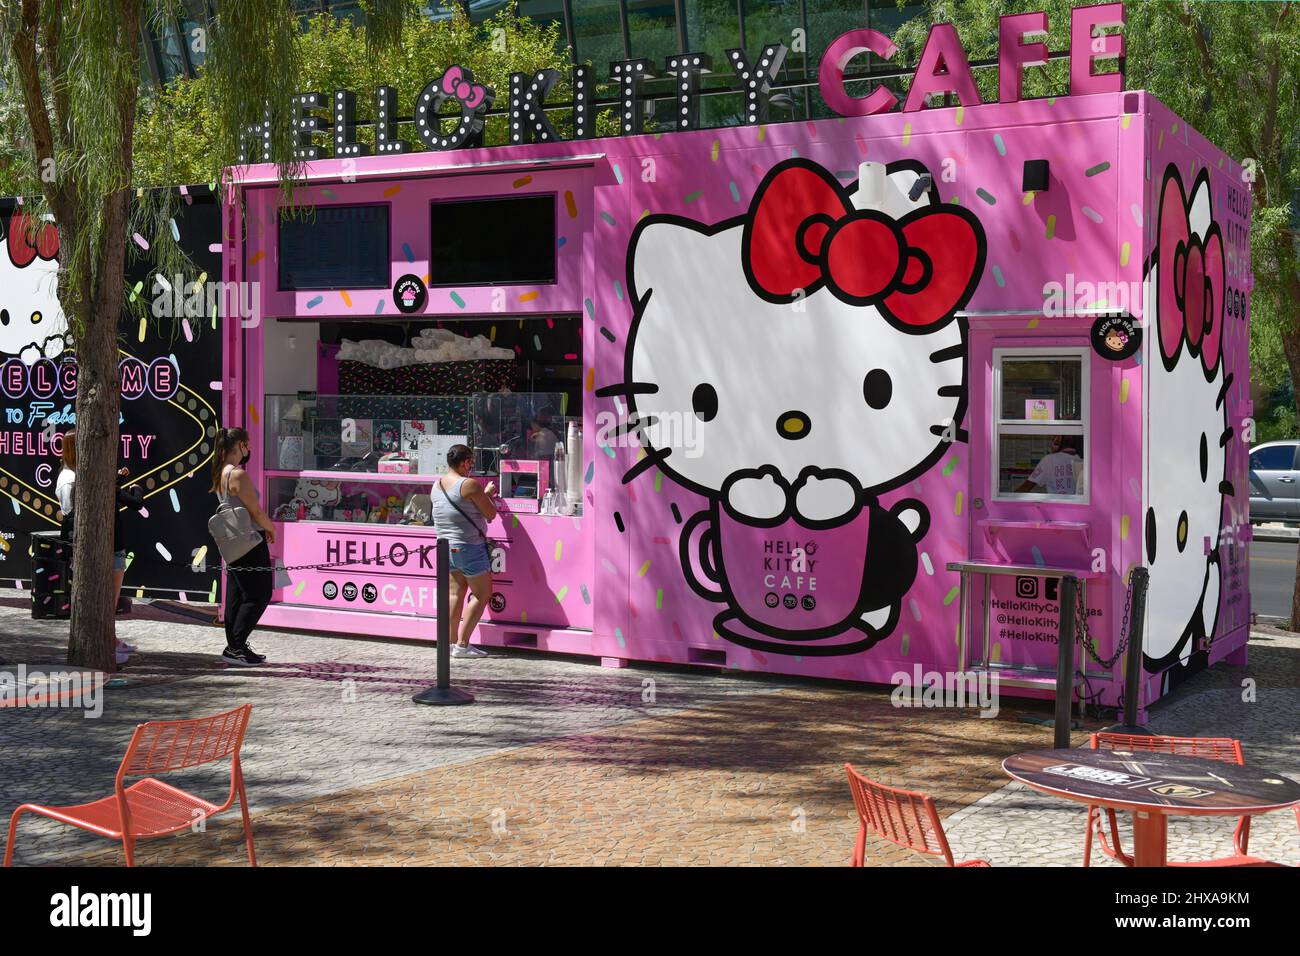 Hello Kitty Cafe Grand Opening - Las Vegas Weekly